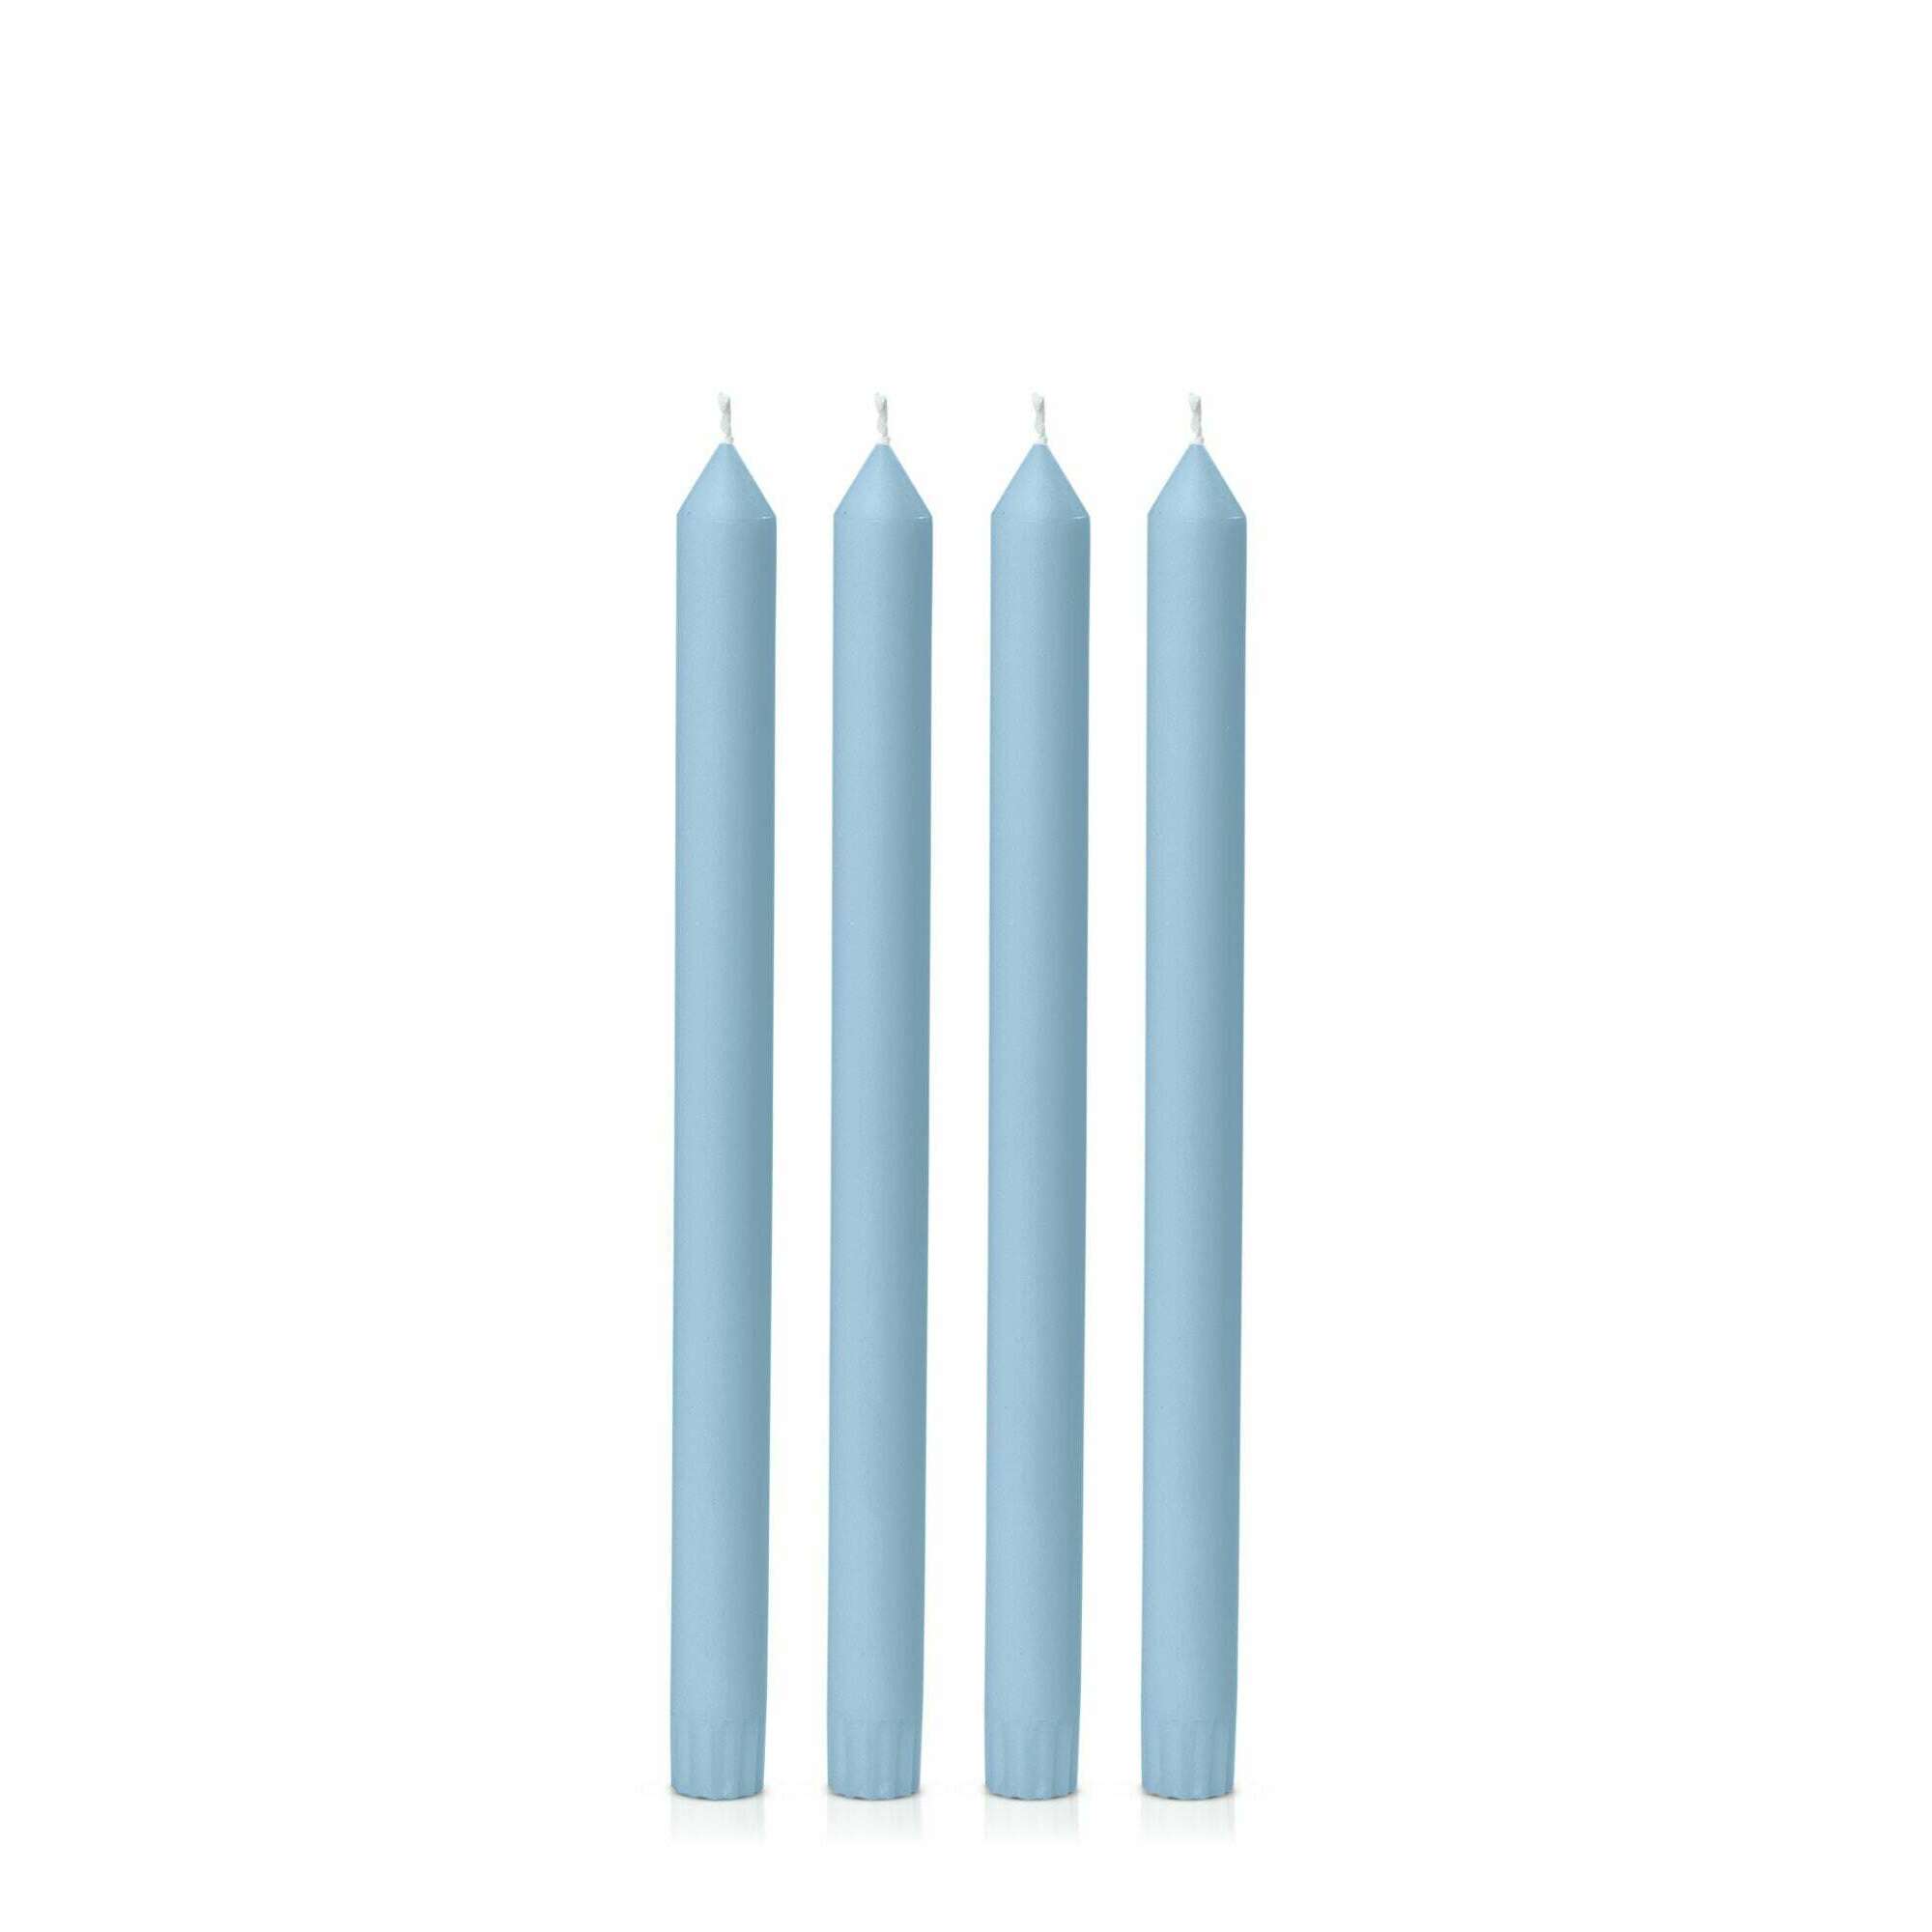 Impodimo Living & Giving:Moreton Eco Dinner Candle - Pastel Blue:Candle Co